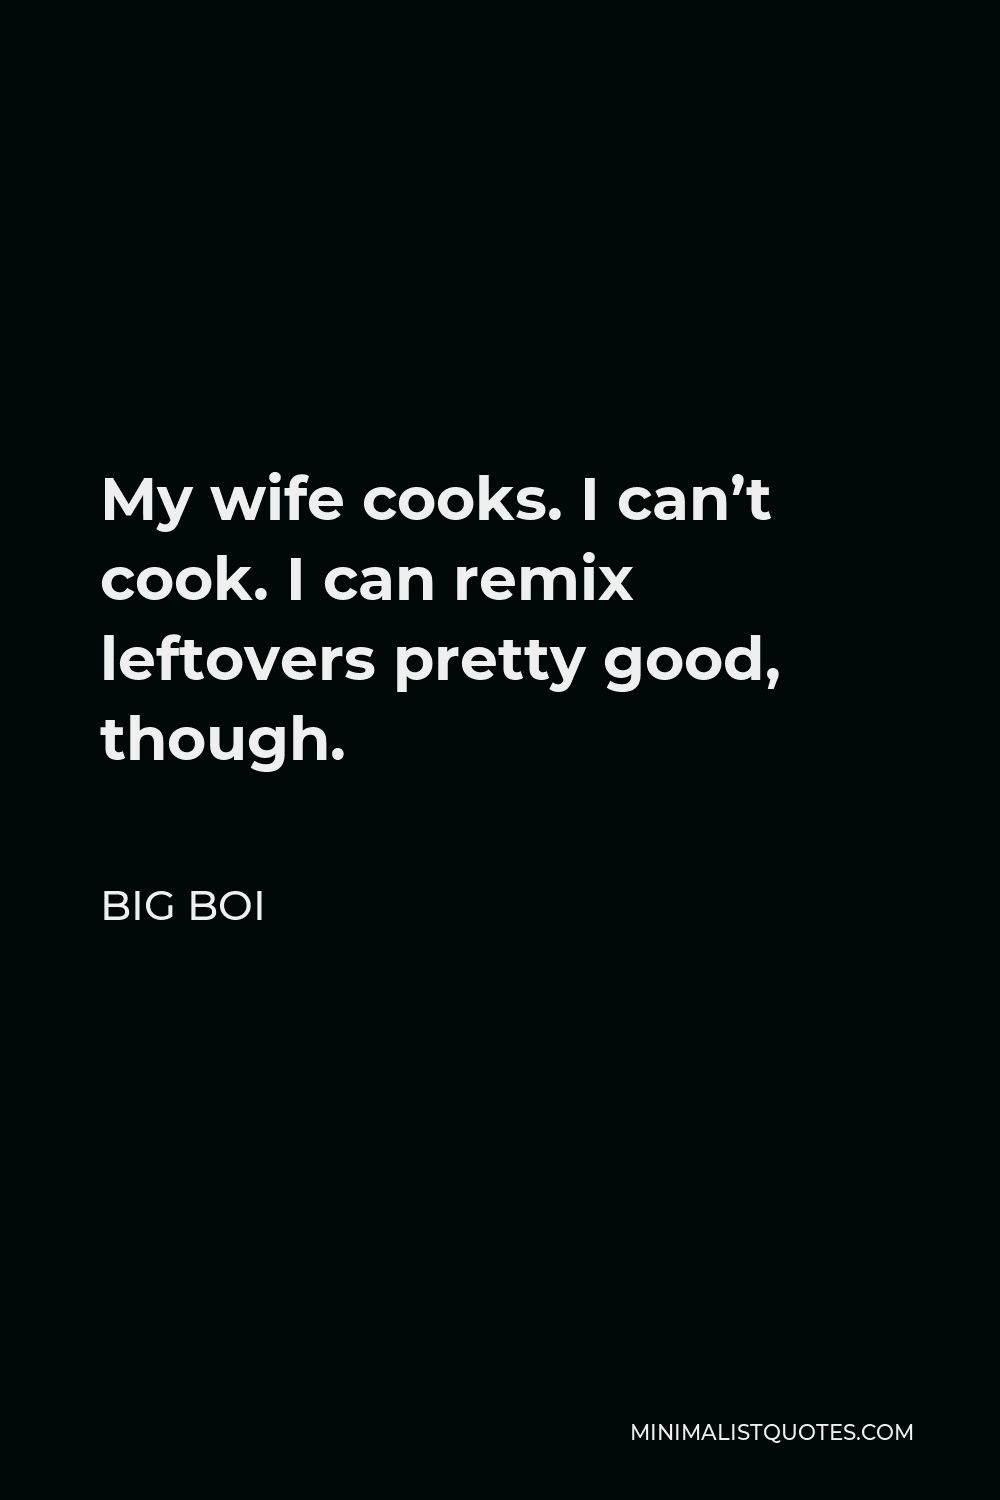 Big Boi Quote - My wife cooks. I can’t cook. I can remix leftovers pretty good, though.